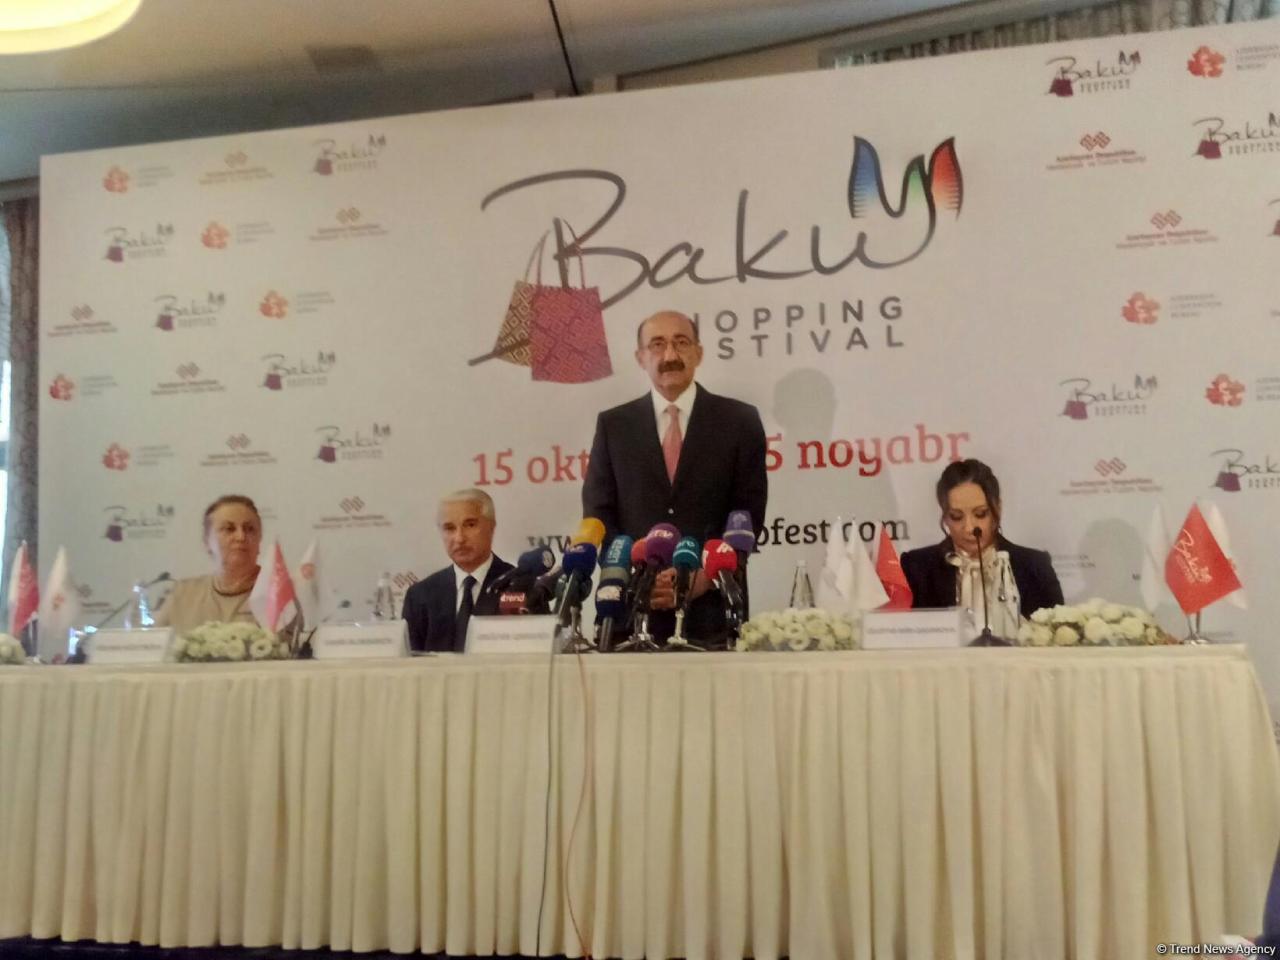 Azerbaijan attracts growing number of visitors with festivals